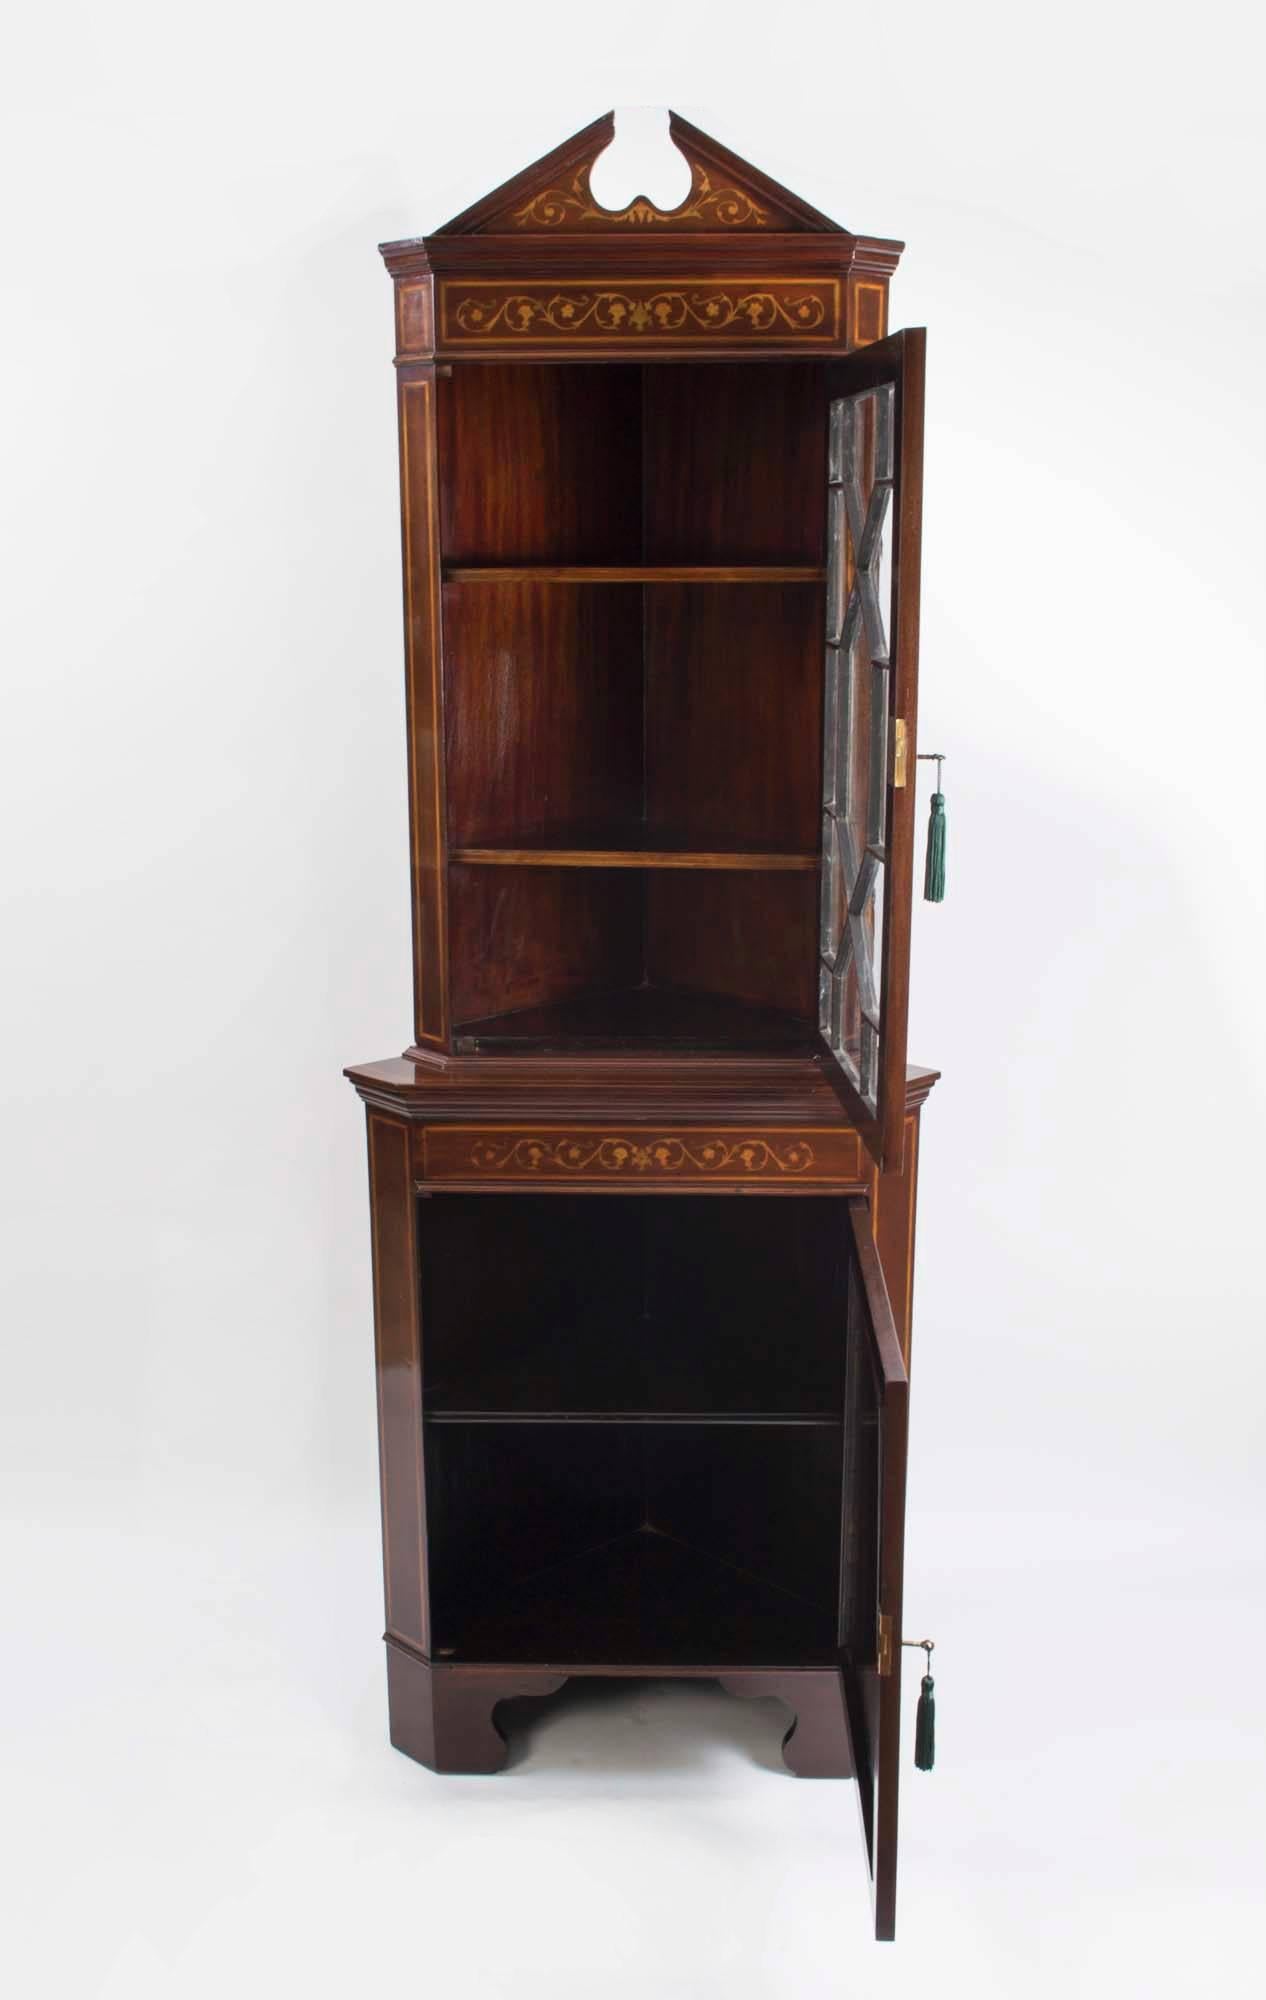 This is a fabulous antique English Edwardian profusely inlaid corner cabinet, circa 1880 in date.

The cabinet is made of rich mahogany and has satinwood inlay with garlands, swags, urns and floral motifs, as well as satinwood and ebony